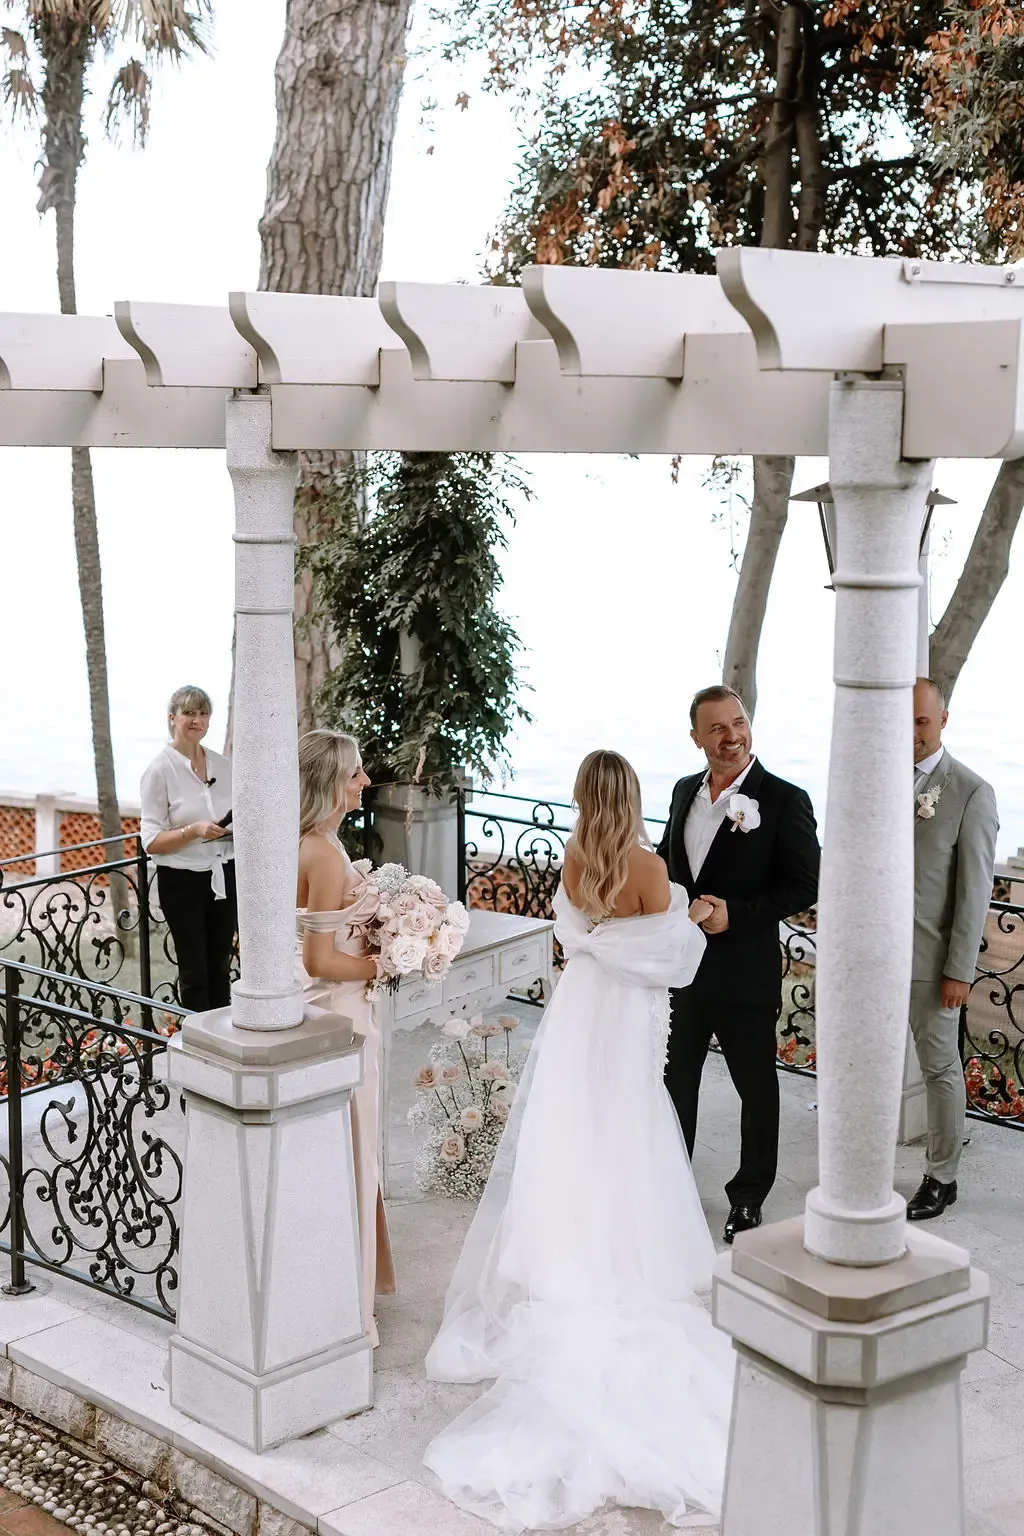 A couple exchanging vows at an outdoor wedding ceremony, surrounded by a few guests, with a scenic view of trees and the sky in the background.